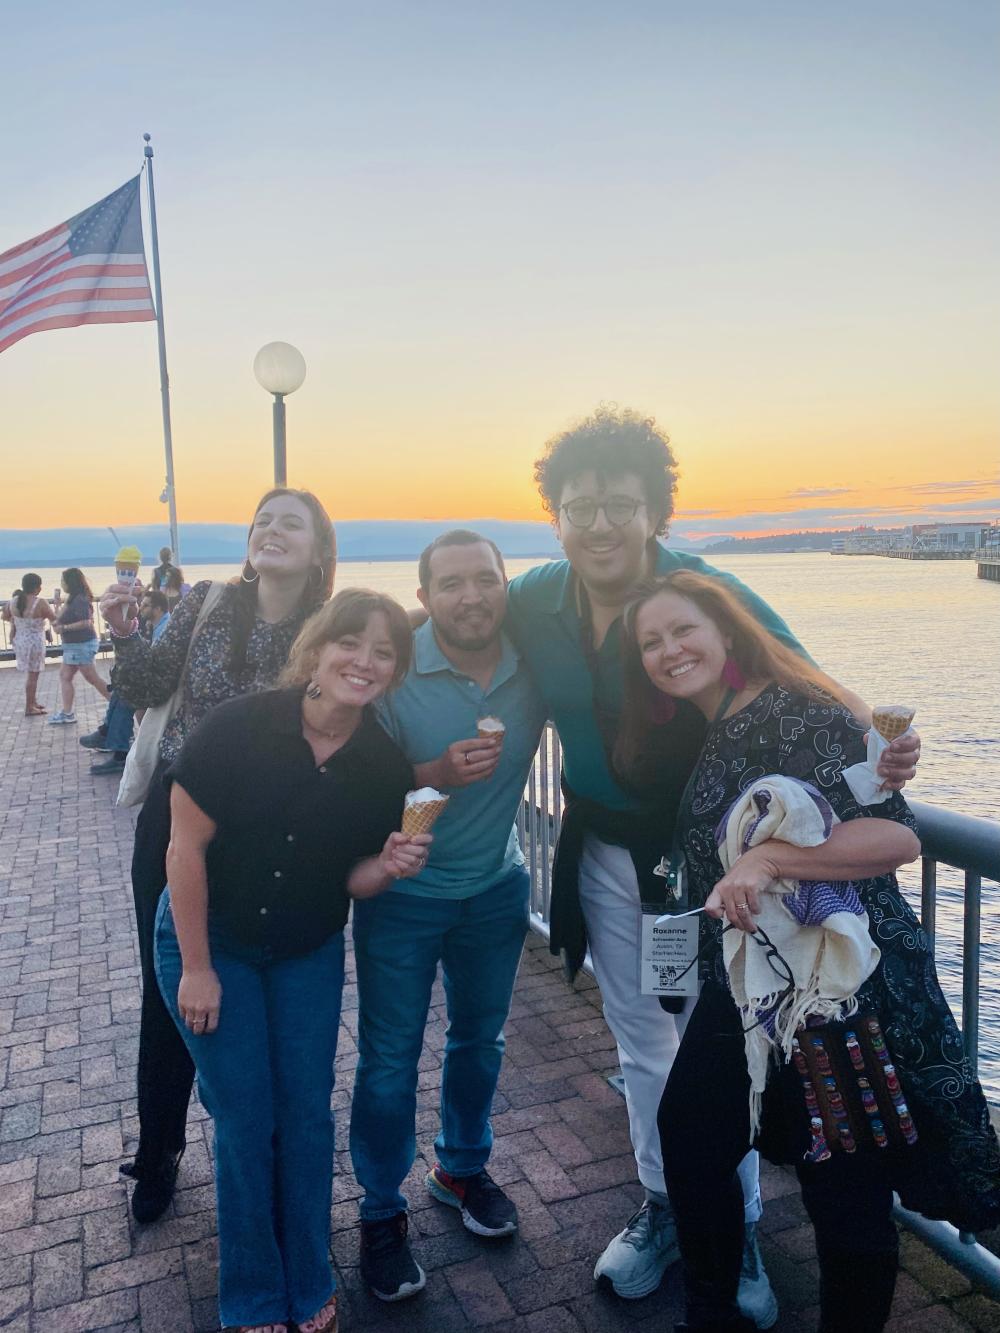 Faculty, students and alumni pose together with ice cream cones on a pier in Seattle